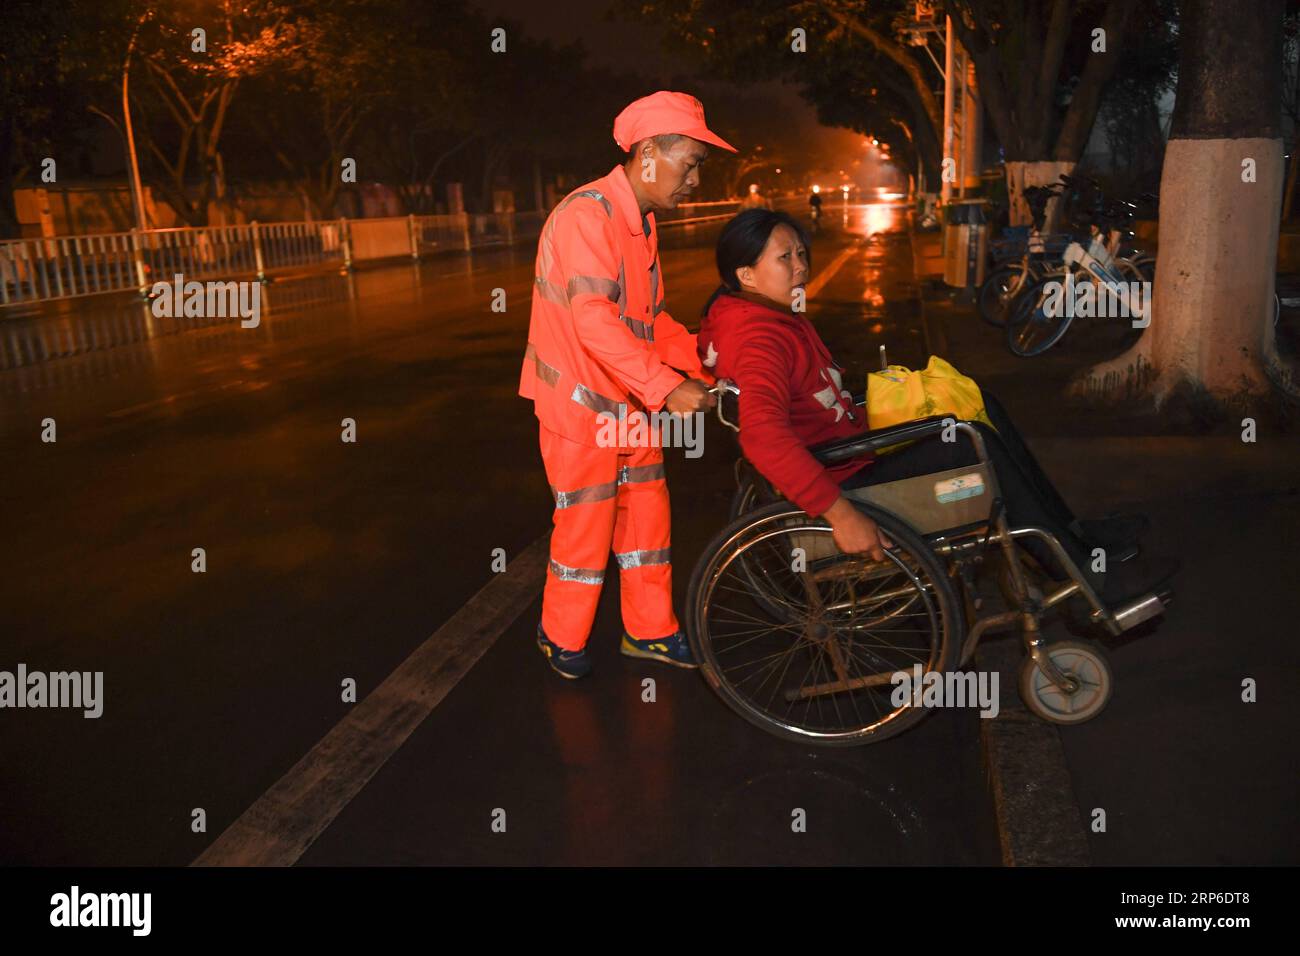 (190110) -- LONGYAN, Jan. 10, 2019 (Xinhua) -- Sanitation worker Dong Jidong pushes his wife Dong Jinxiang on a wheelchair before working in Xinluo District of Longyan City, southeast China s Fujian Province, Jan. 9, 2019. Due to femoral head necrosis disease, Dong Jinxiang has been living on a wheelchair for about a decade. To take care of his handicapped wife, Dong Jidong, who himself has been afflicted with ankylosing spondylitis, gave up his work in a cement plant and chose to clean the streets near their home two years ago just in order to take better care of his wife. Everyday, Dong Jido Stock Photo